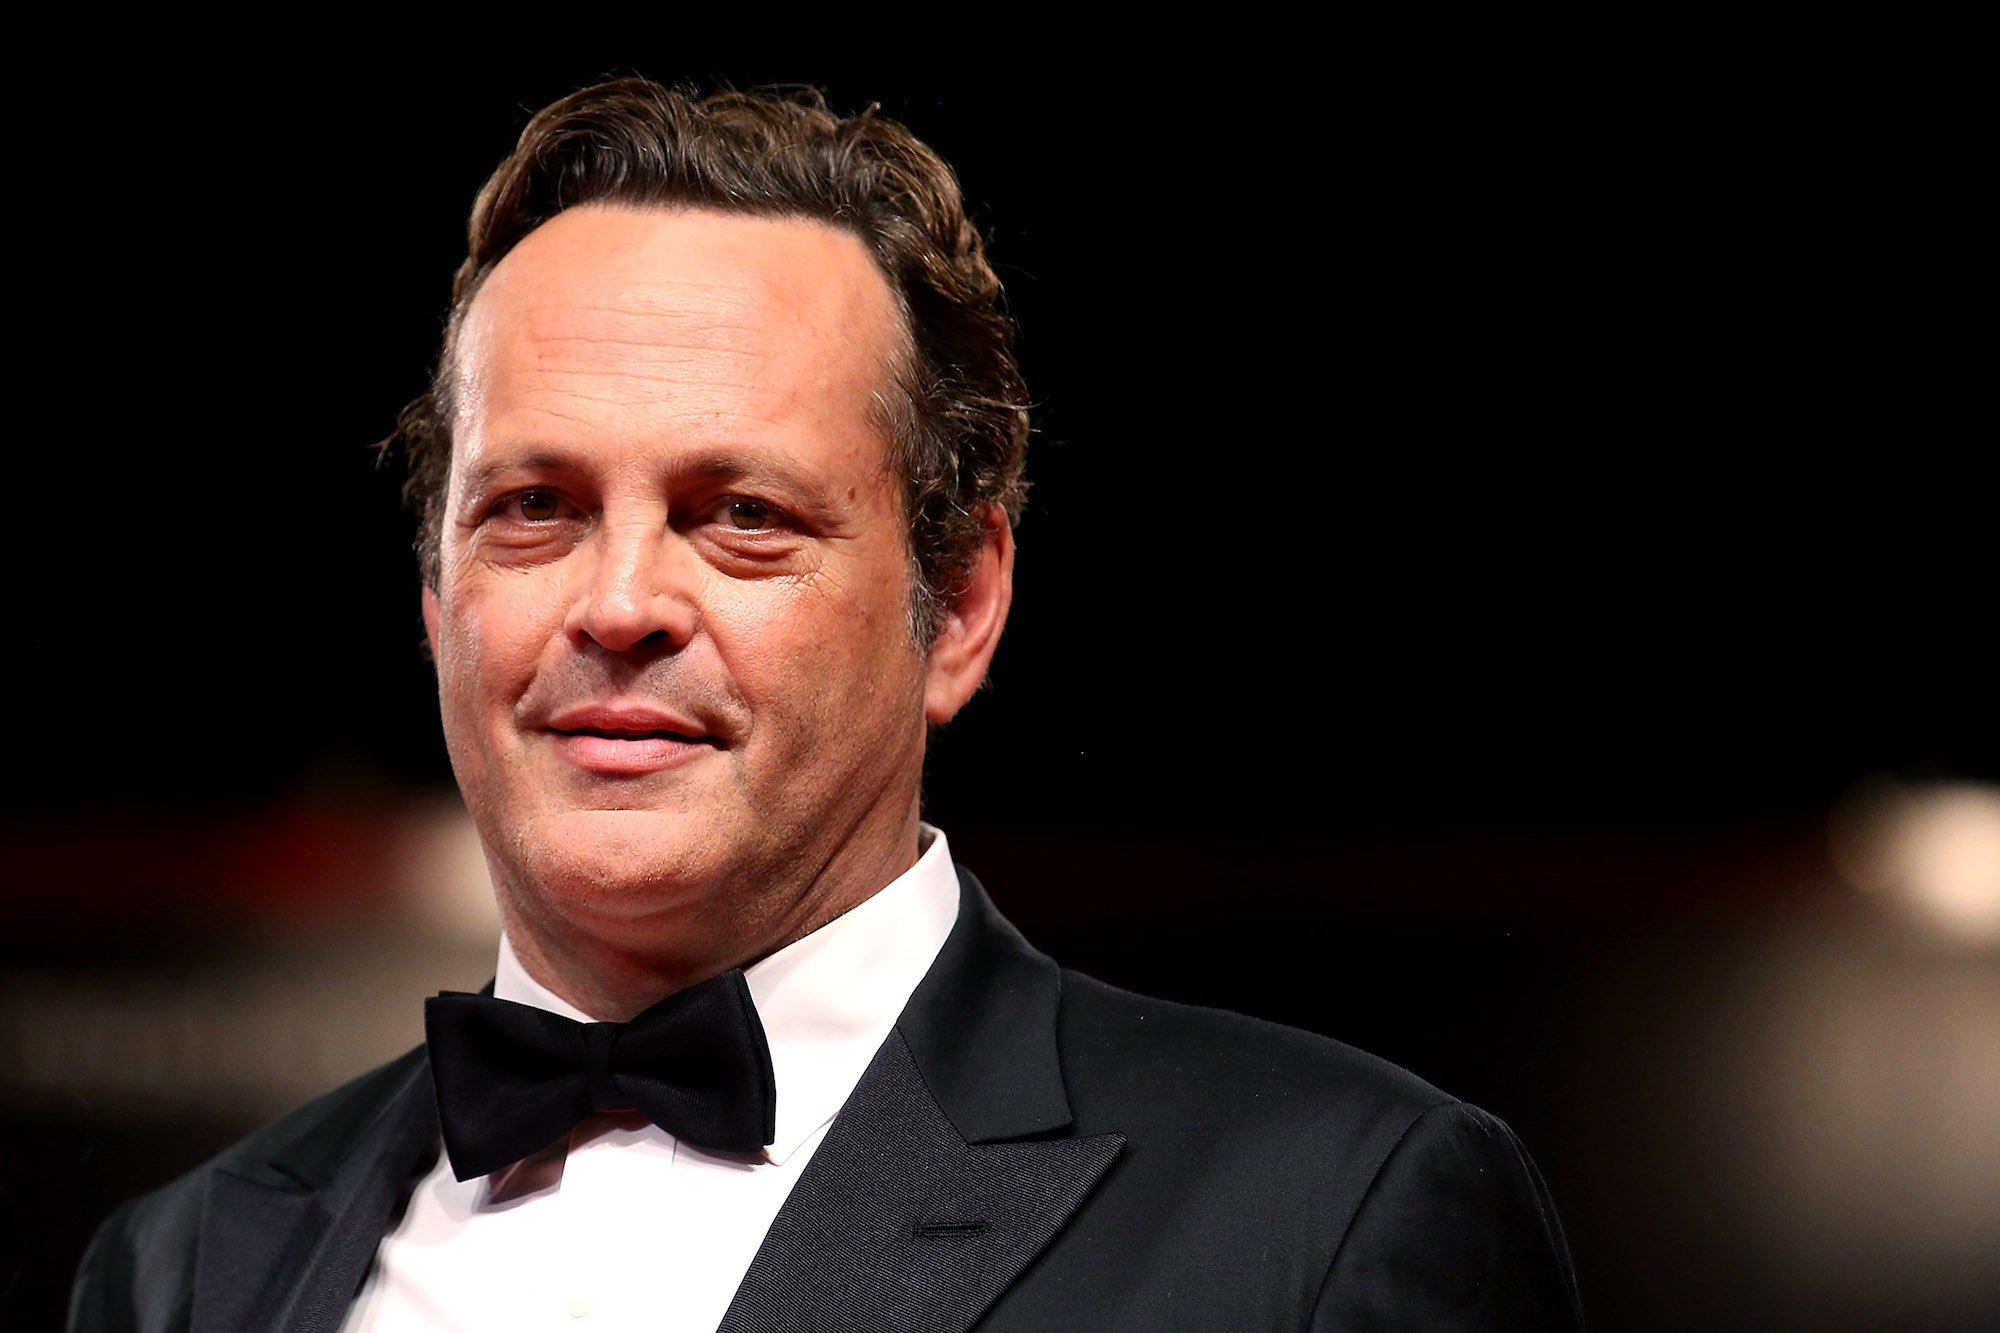 Vince Vaughn smiling in front of a black background